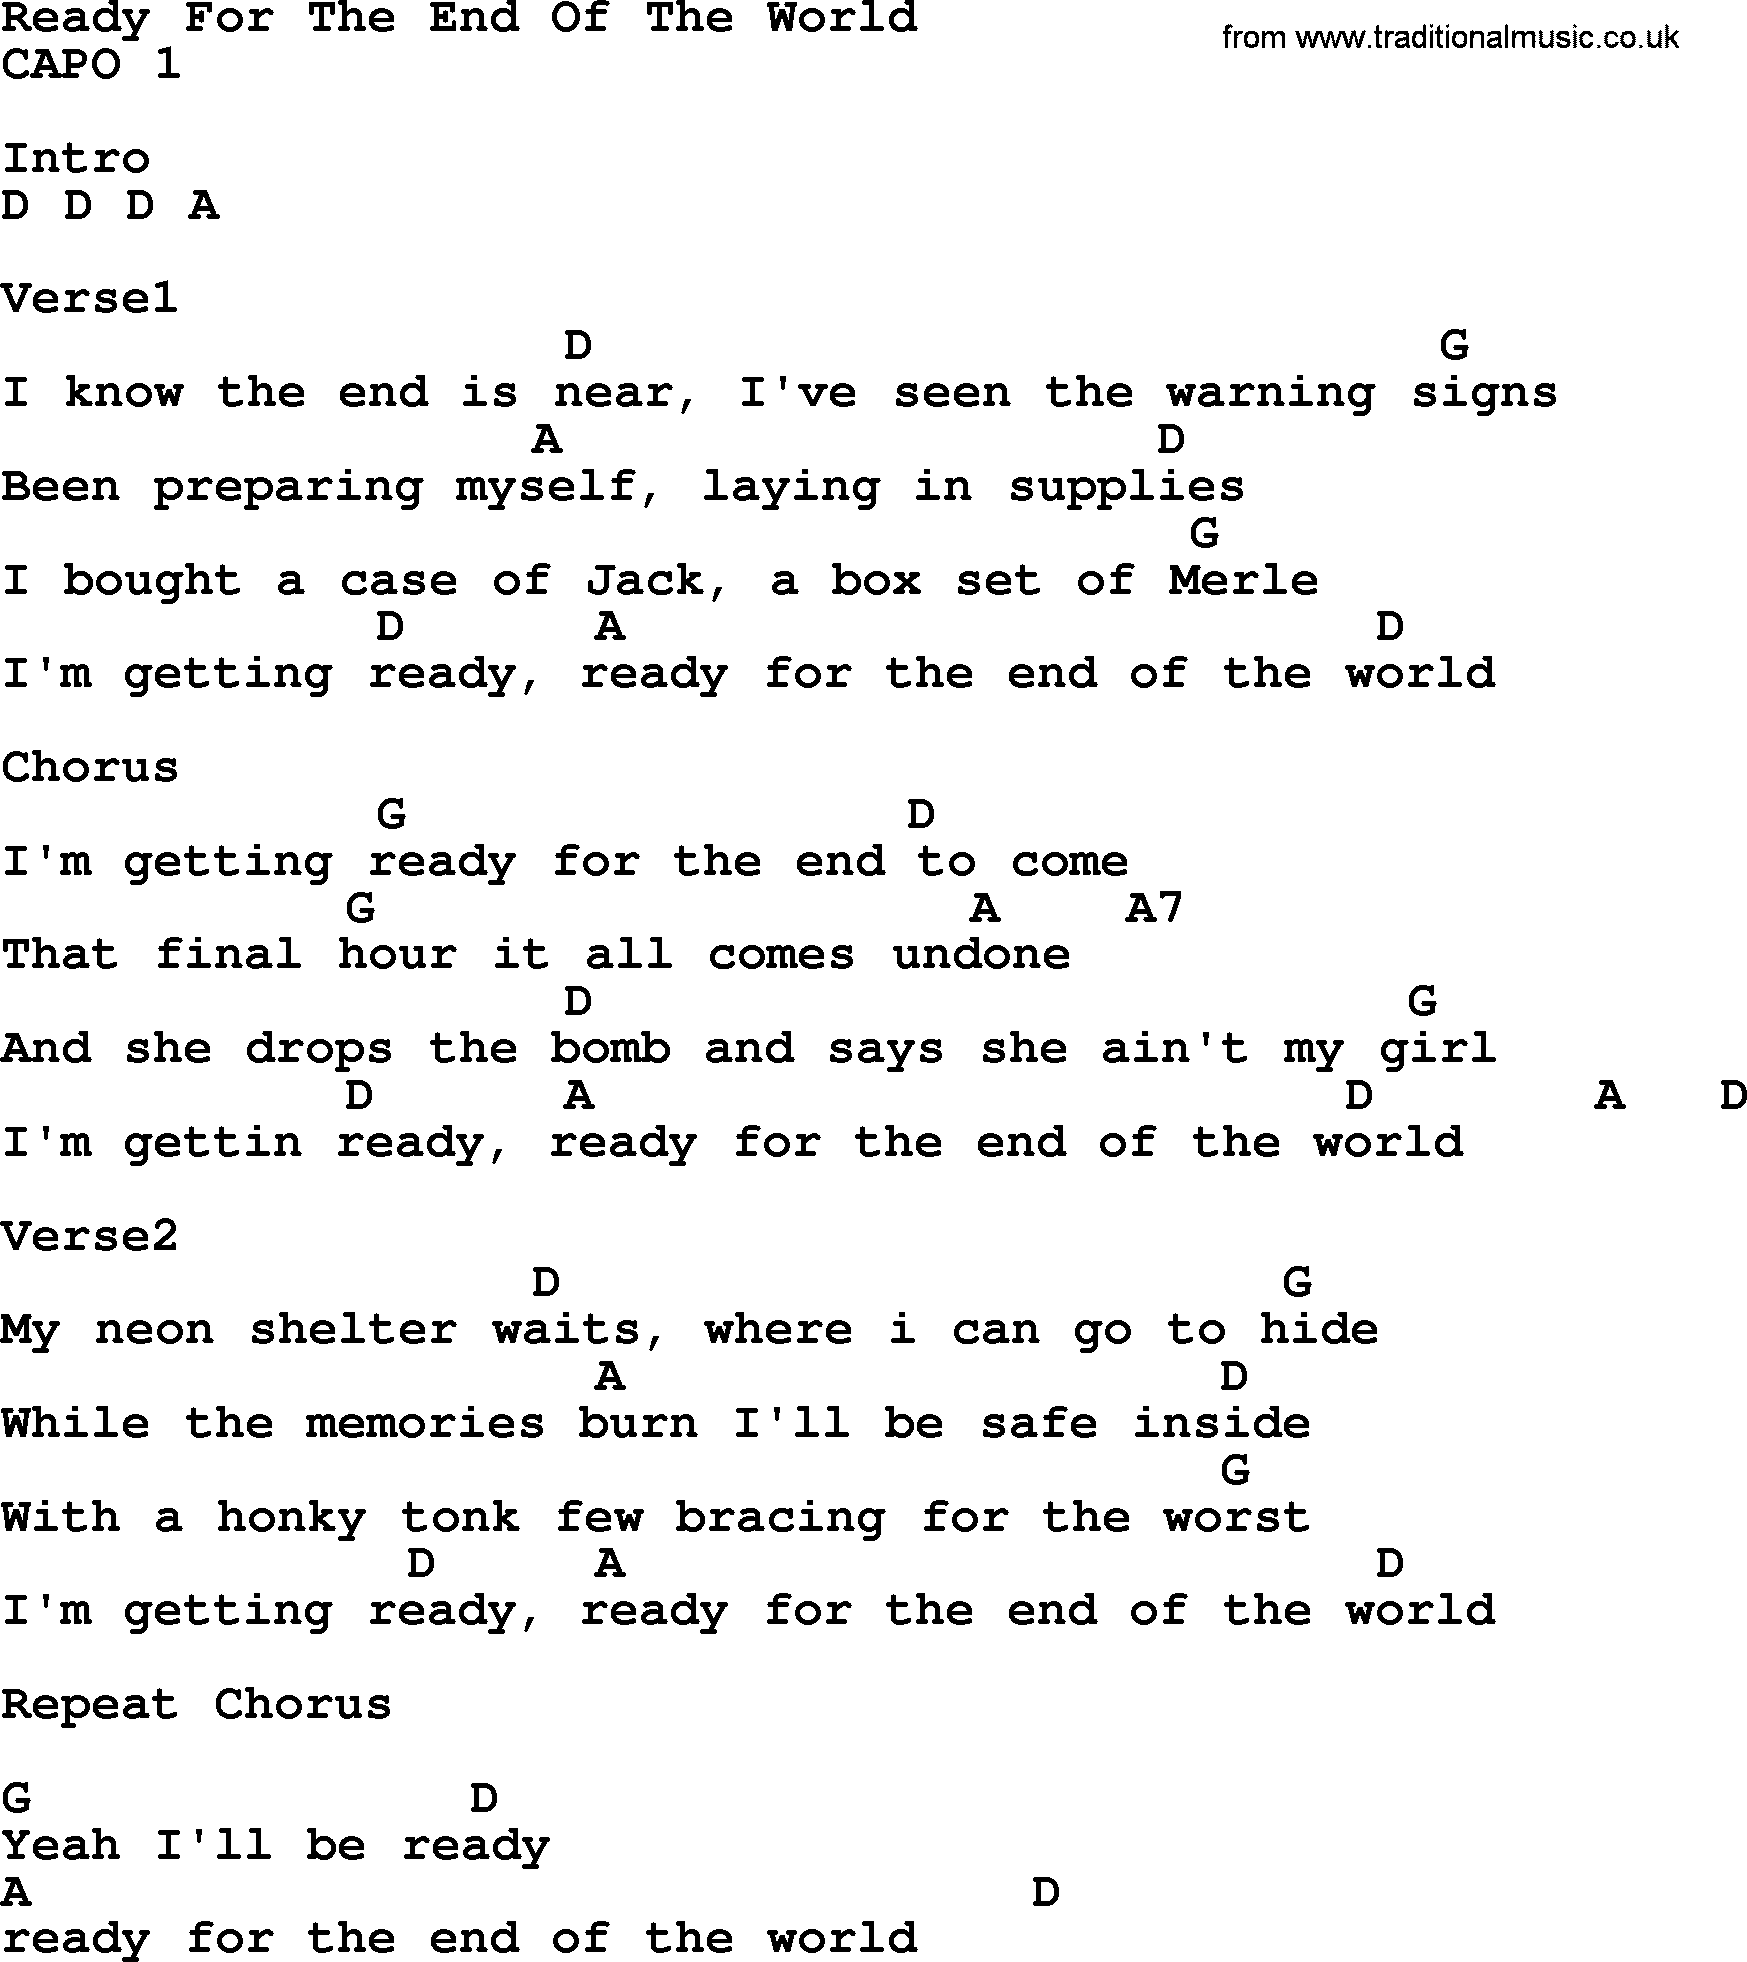 Song lyrics with guitar chords for The End Of The World